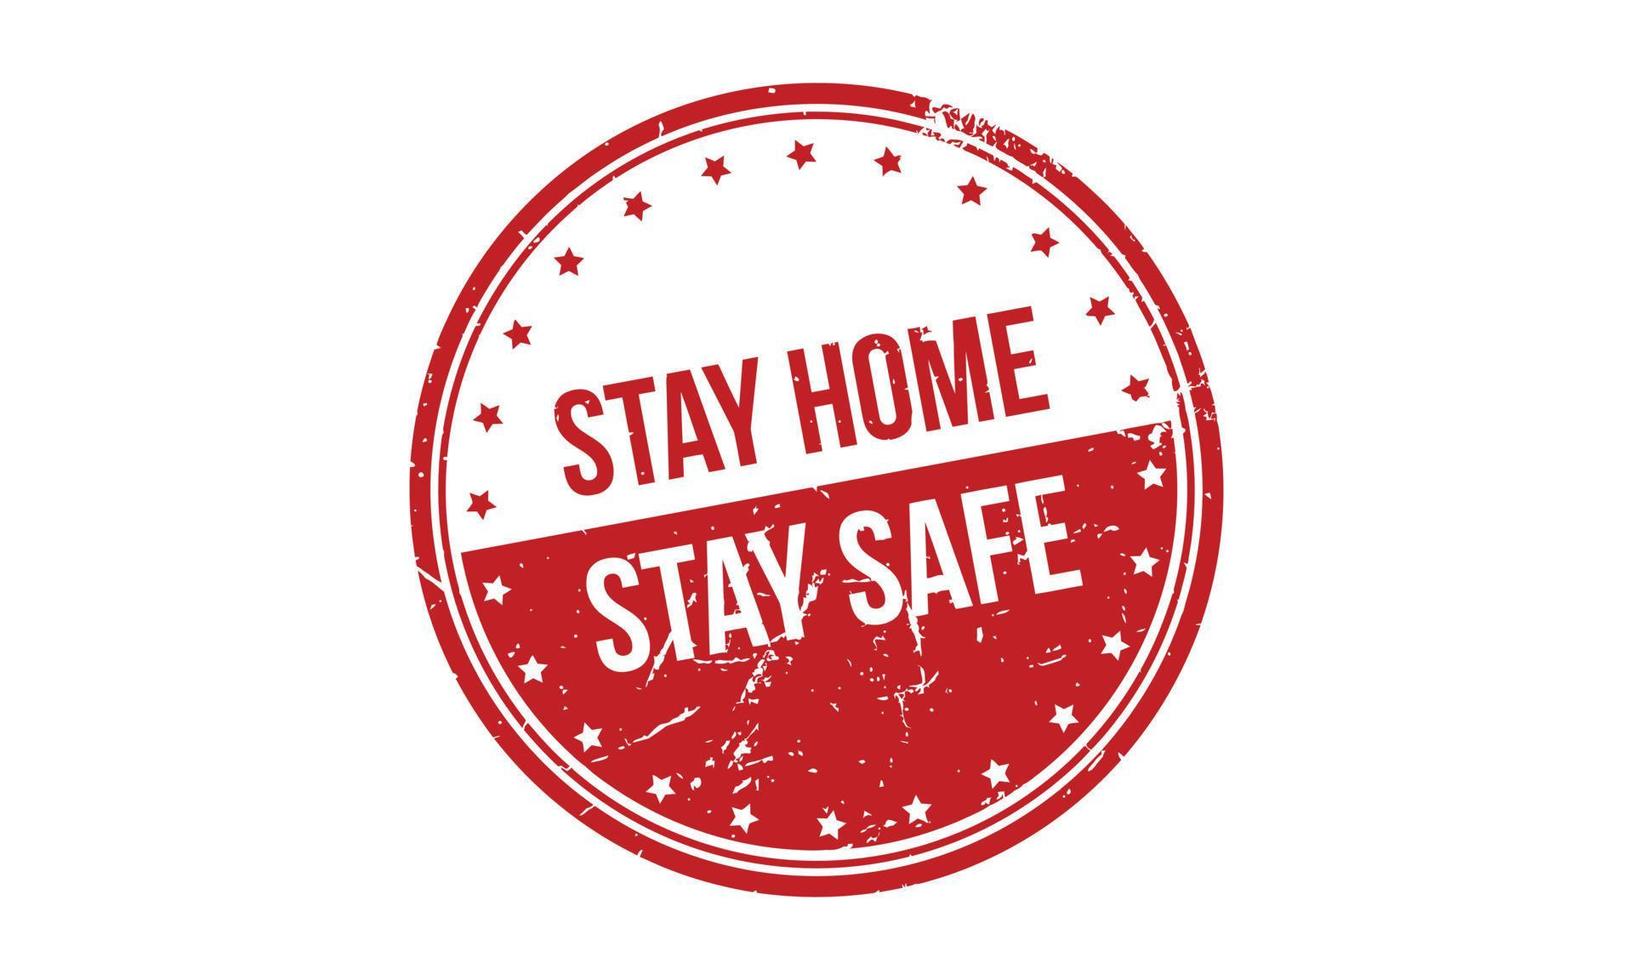 Stay Home Stay Safe Rubber Stamp. Red Stay Home Stay Safe Rubber Grunge Stamp Seal Vector Illustration